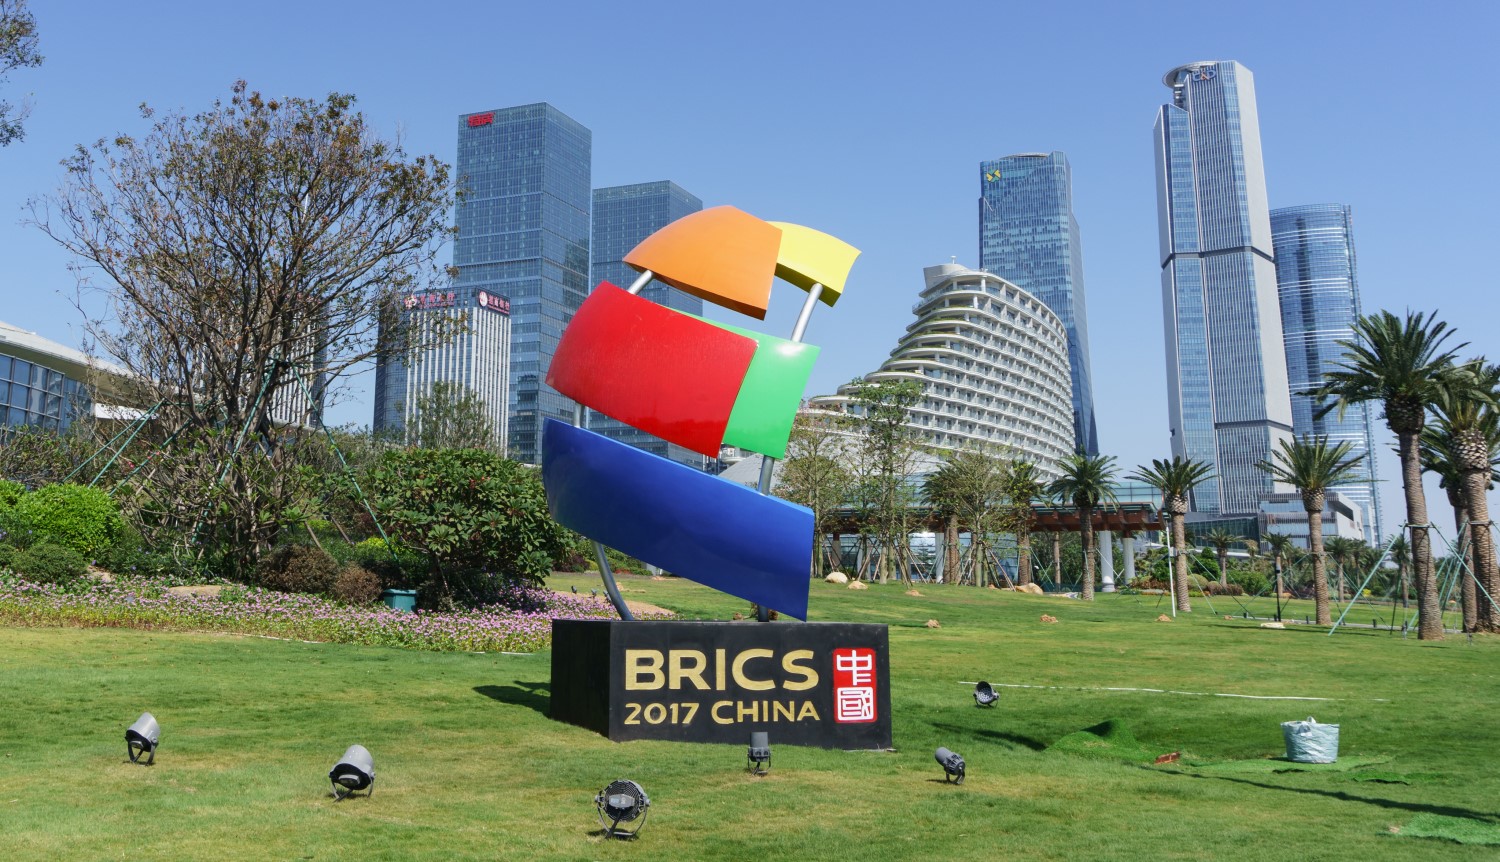 Can I Use BRICS Tether for Investments?